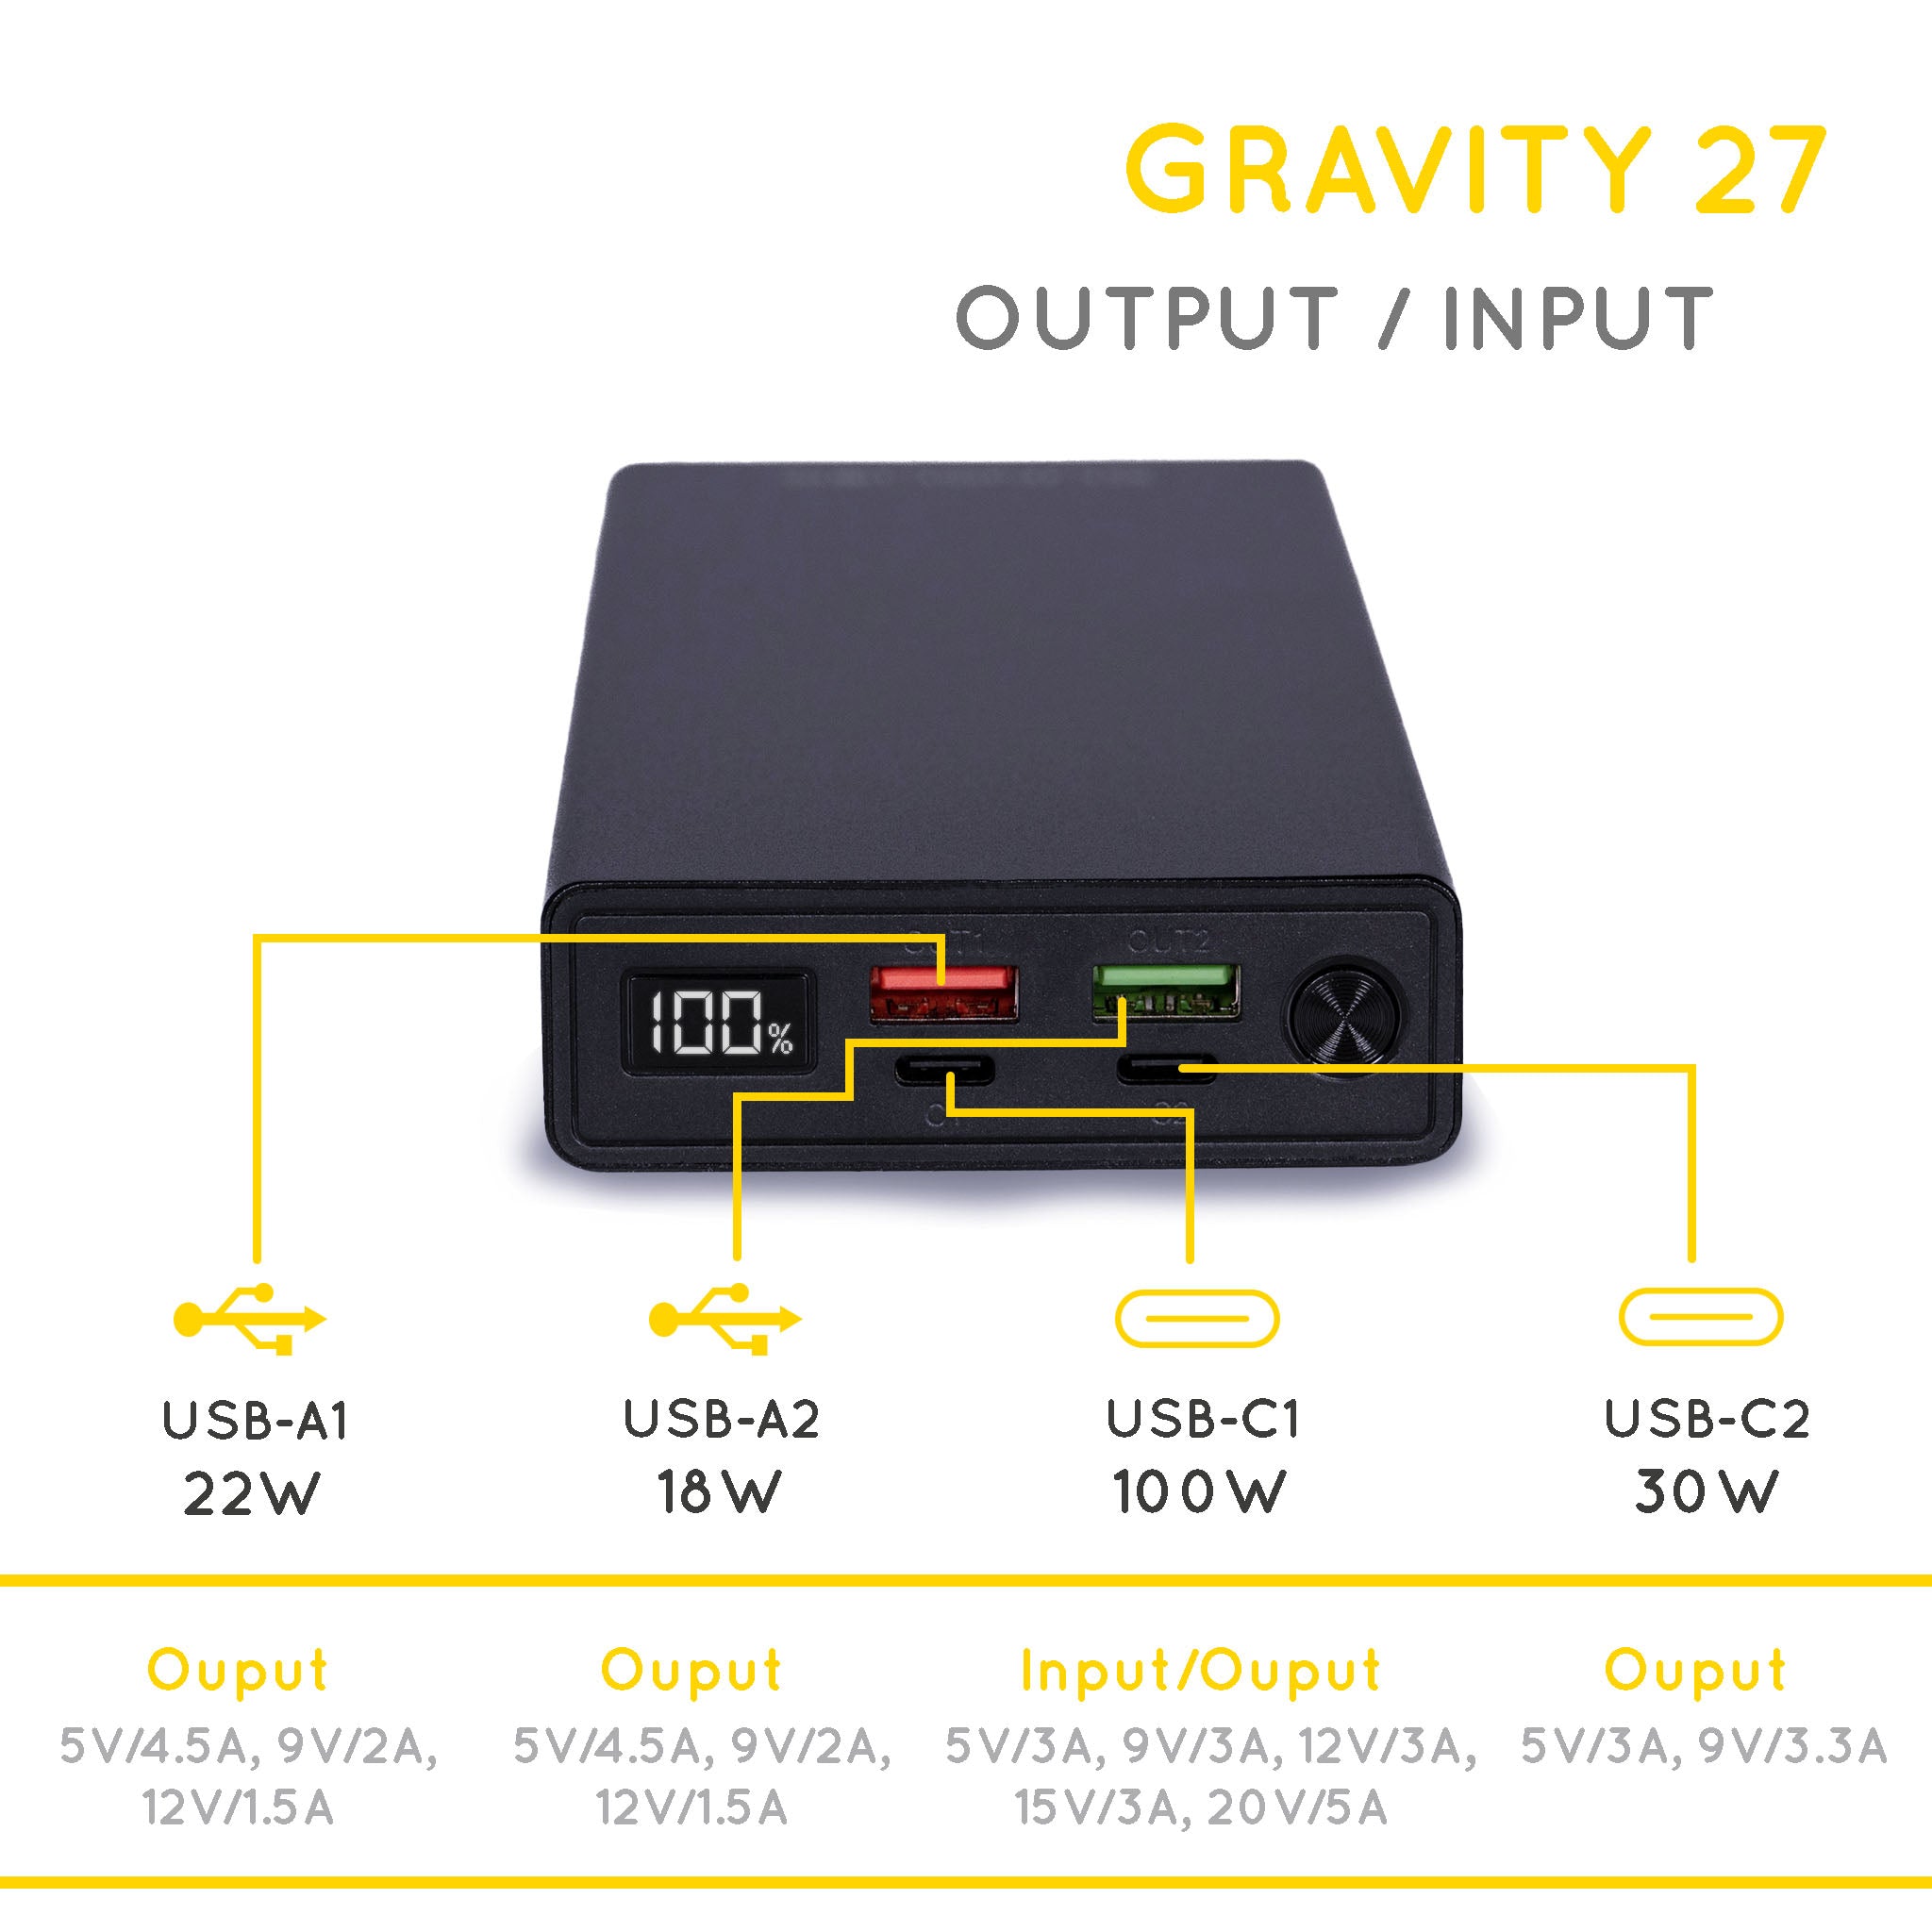 Power bank Gravity 27 output and input informations : 2 x USB- A ( output) , 2 x USB -C ( first one is output/ input  the other just a output